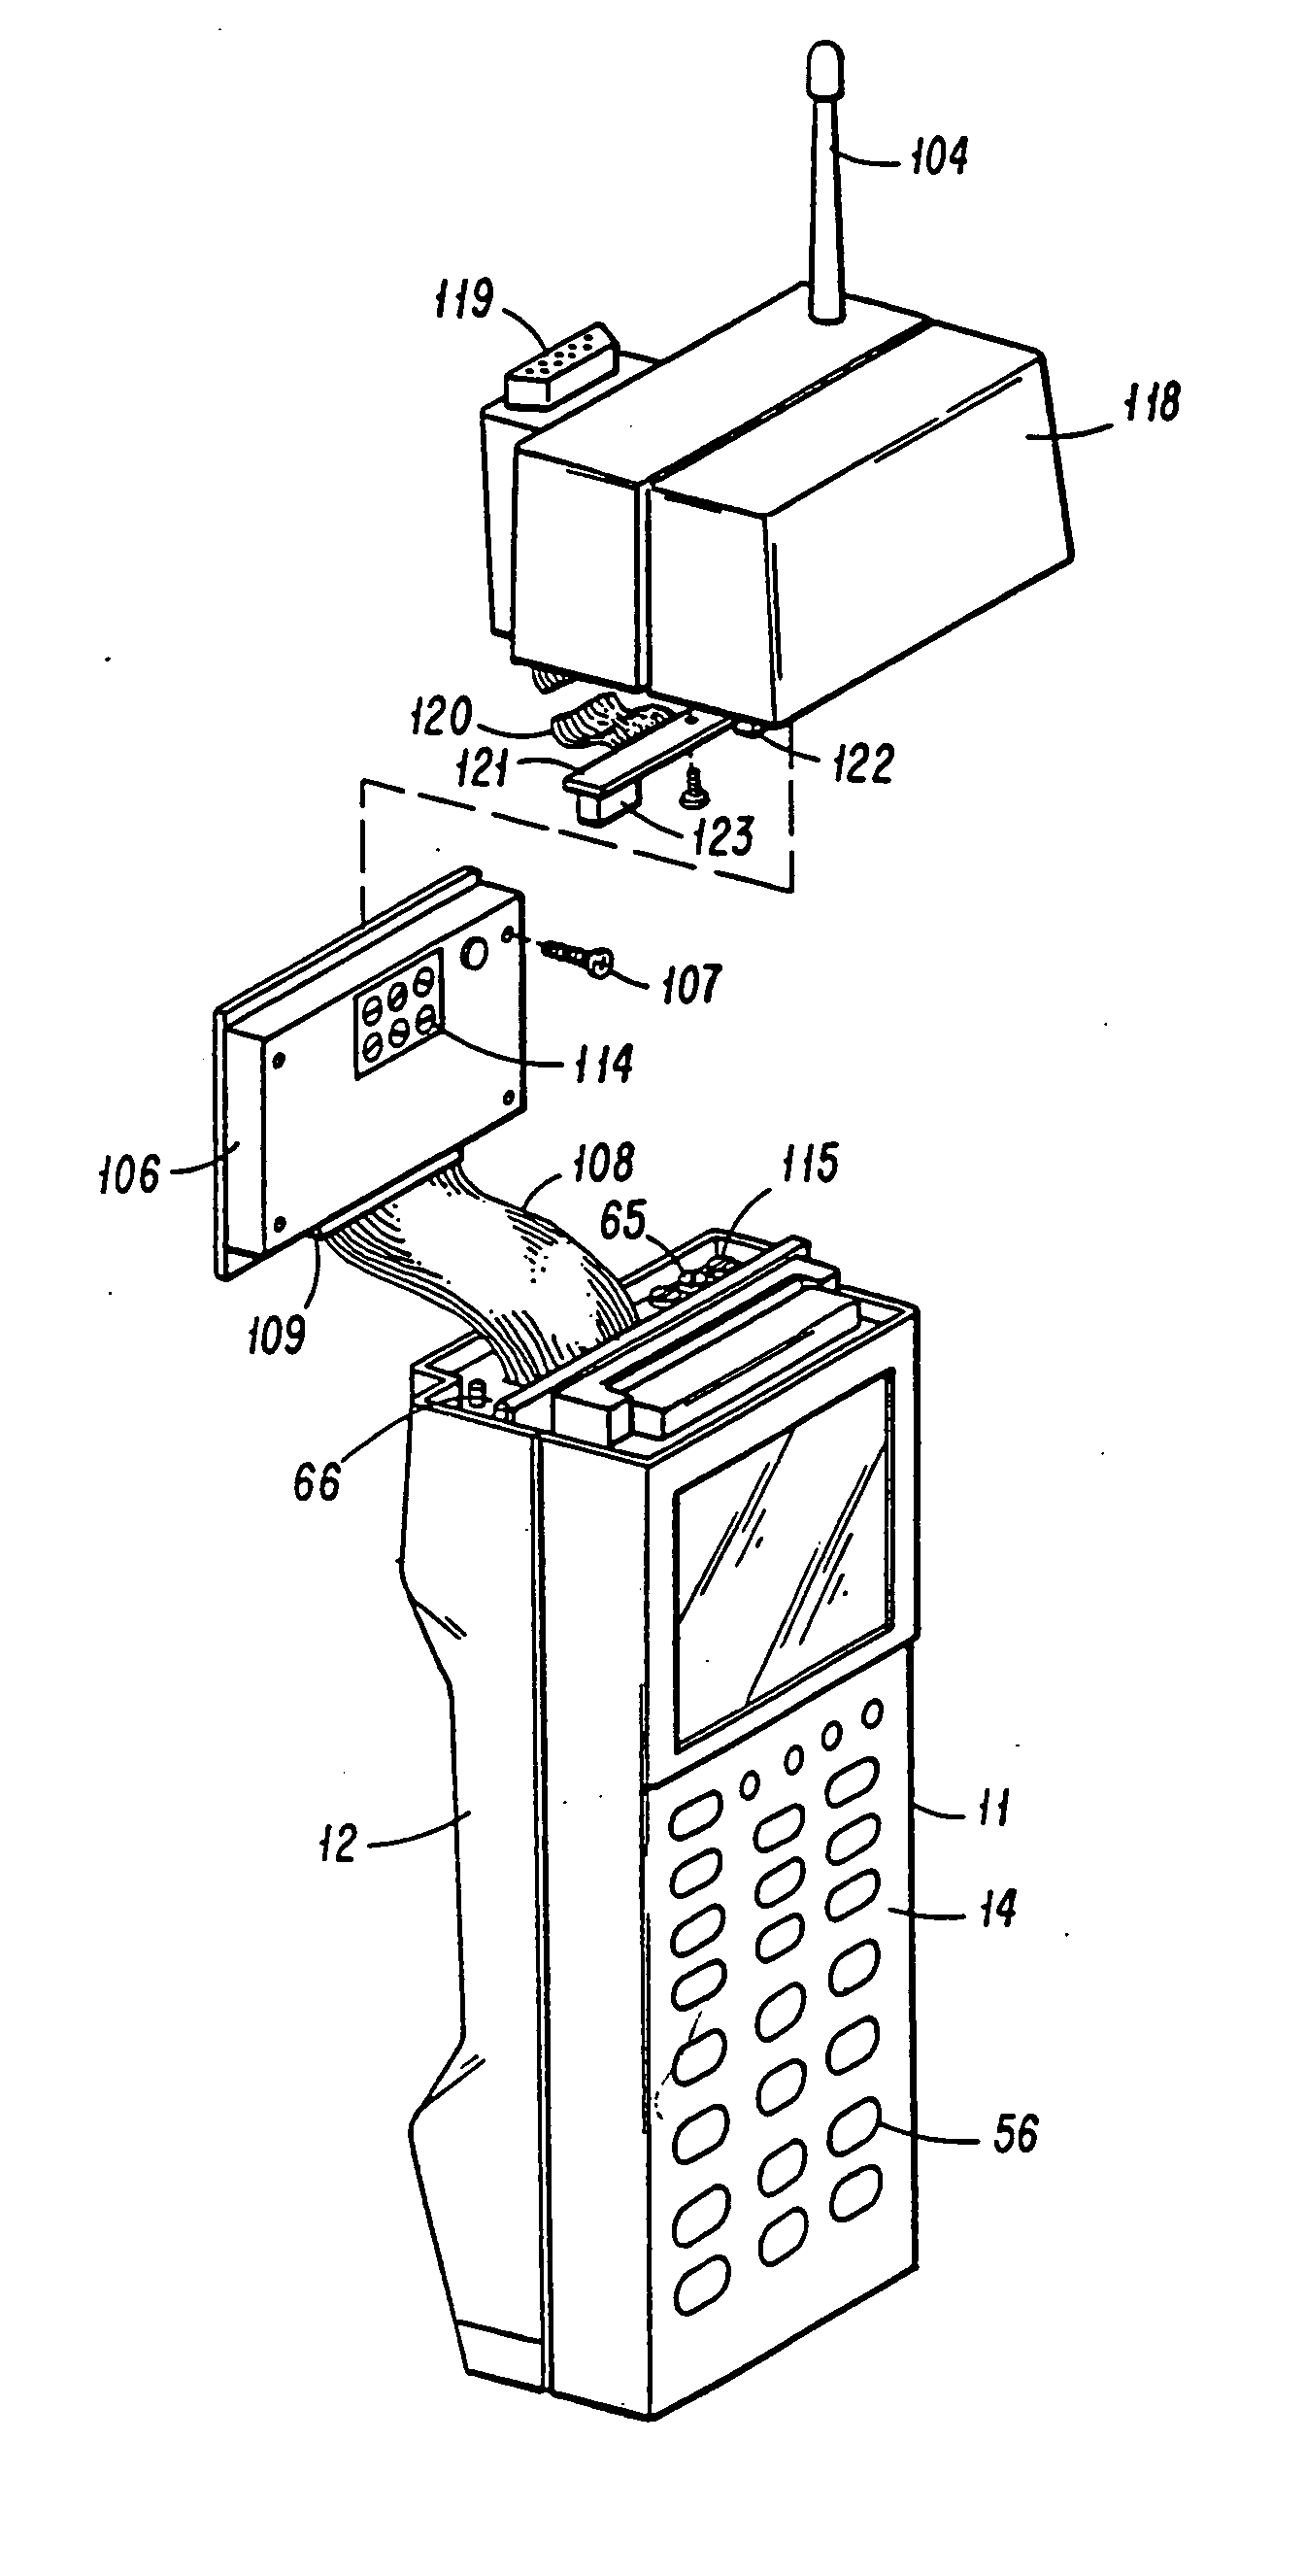 Hand-held data capture system with interchangeable modules